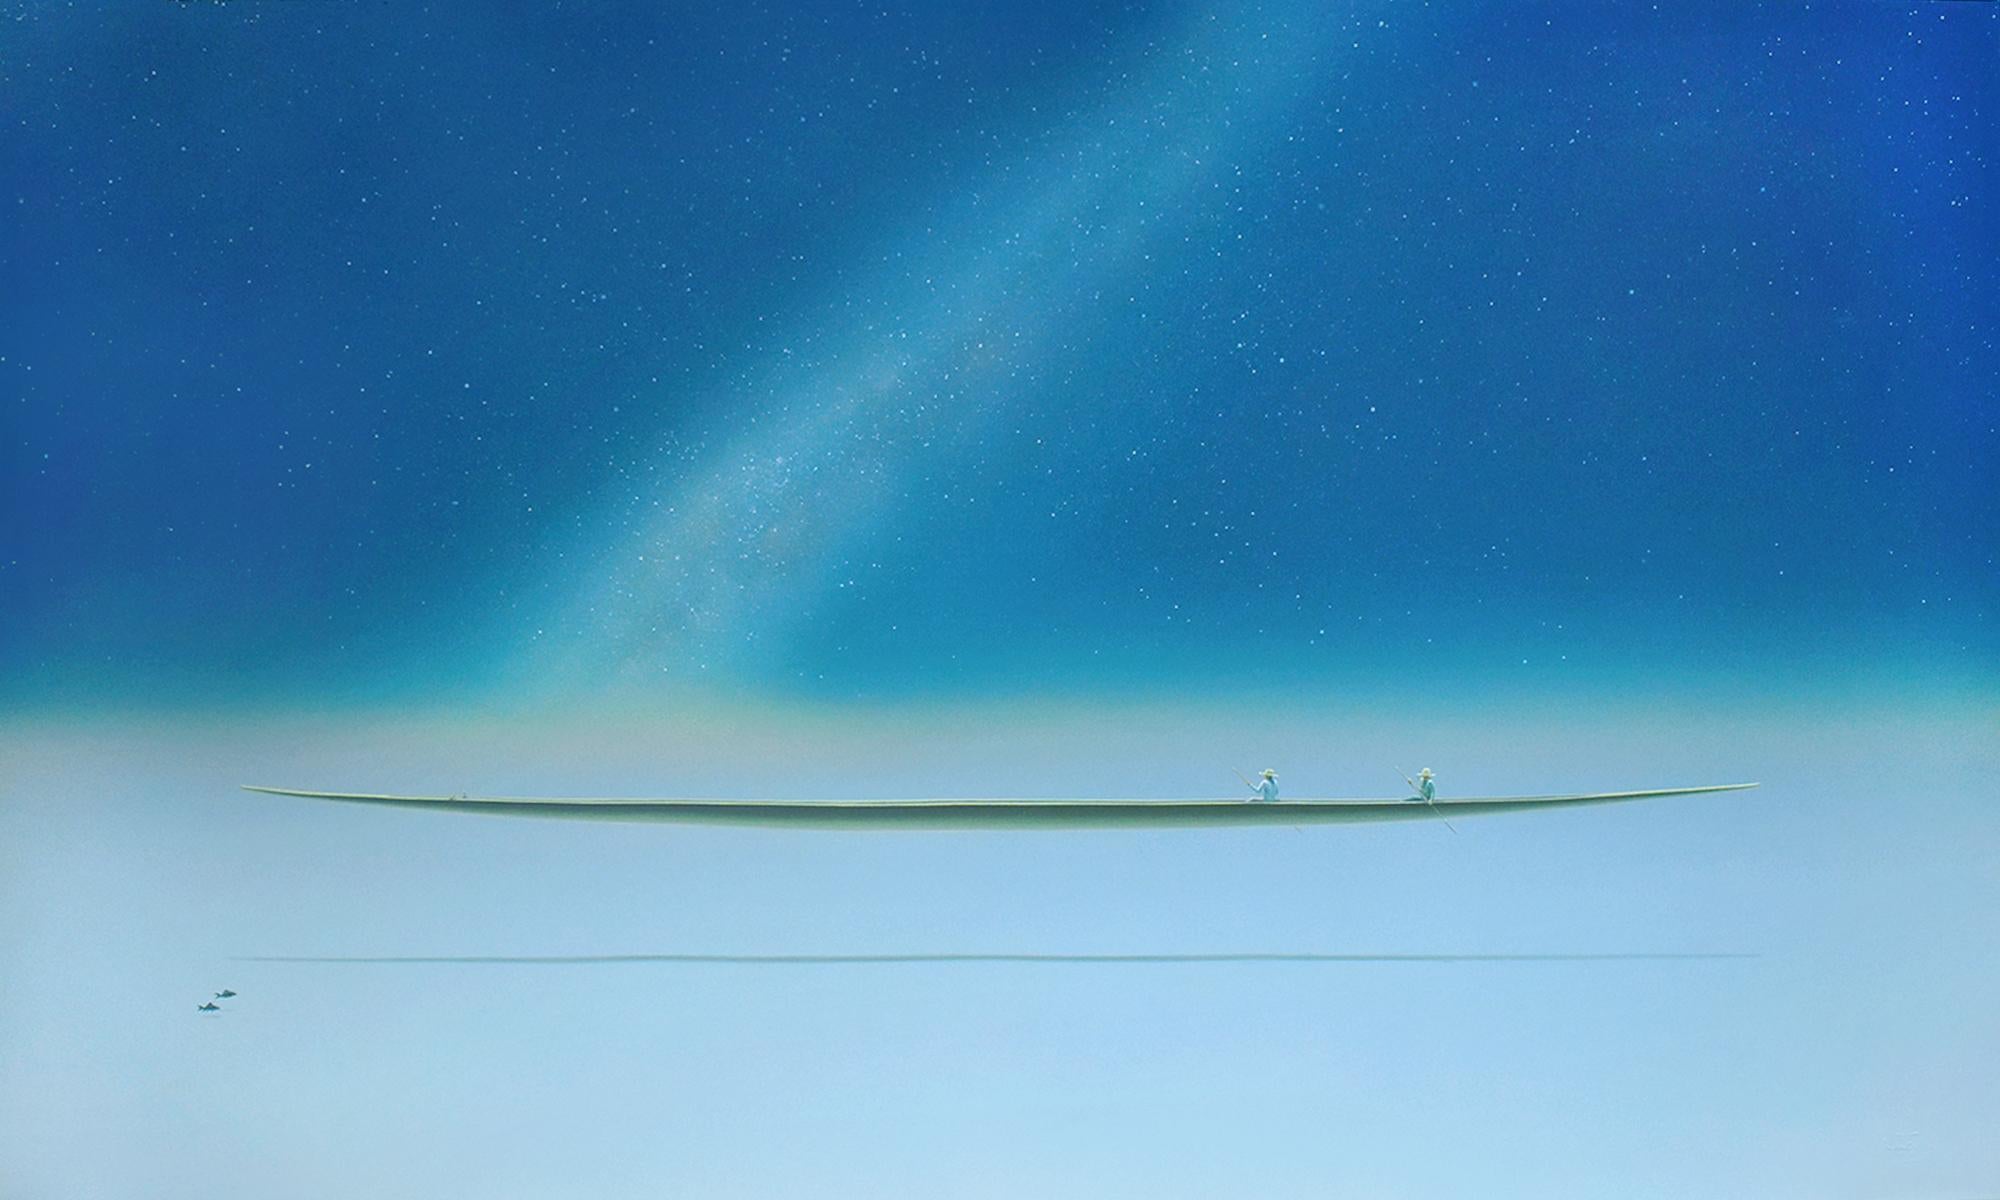 Yuttana Chompupuen Landscape Painting - The Milky Way V2. andscape Waterscape Minimalism Tranquil Scenery Serenity Peace